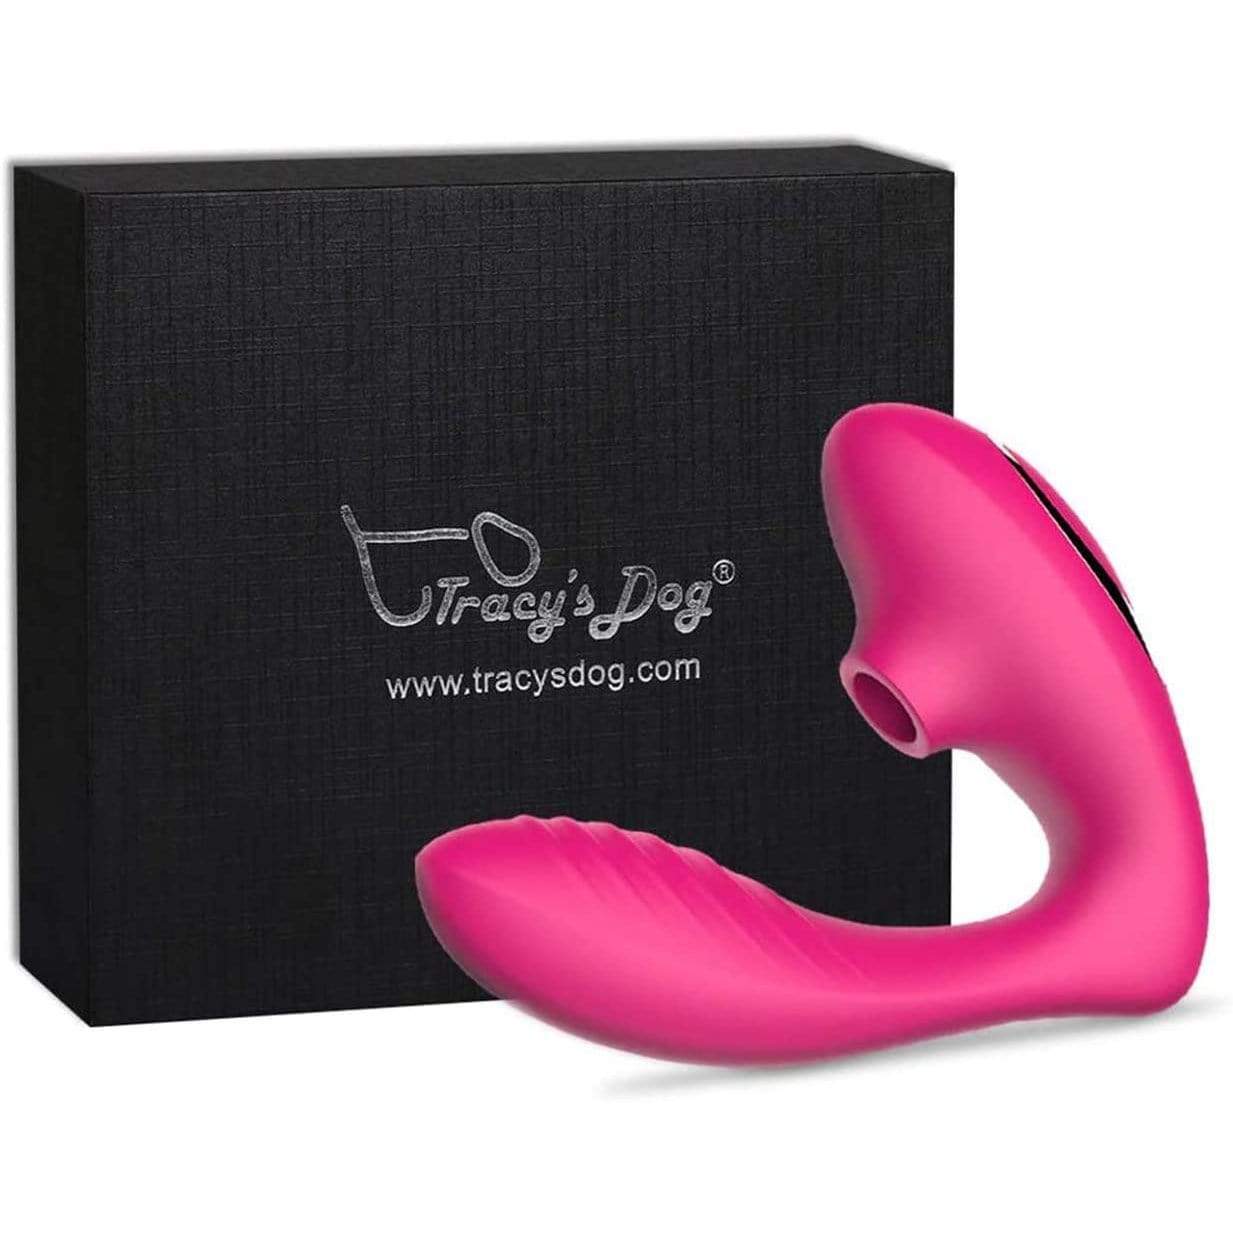 Tracy's Dog -  Clitoral Air Stimulator Vibrator (Pink)    Clit Massager (Vibration) Rechargeable